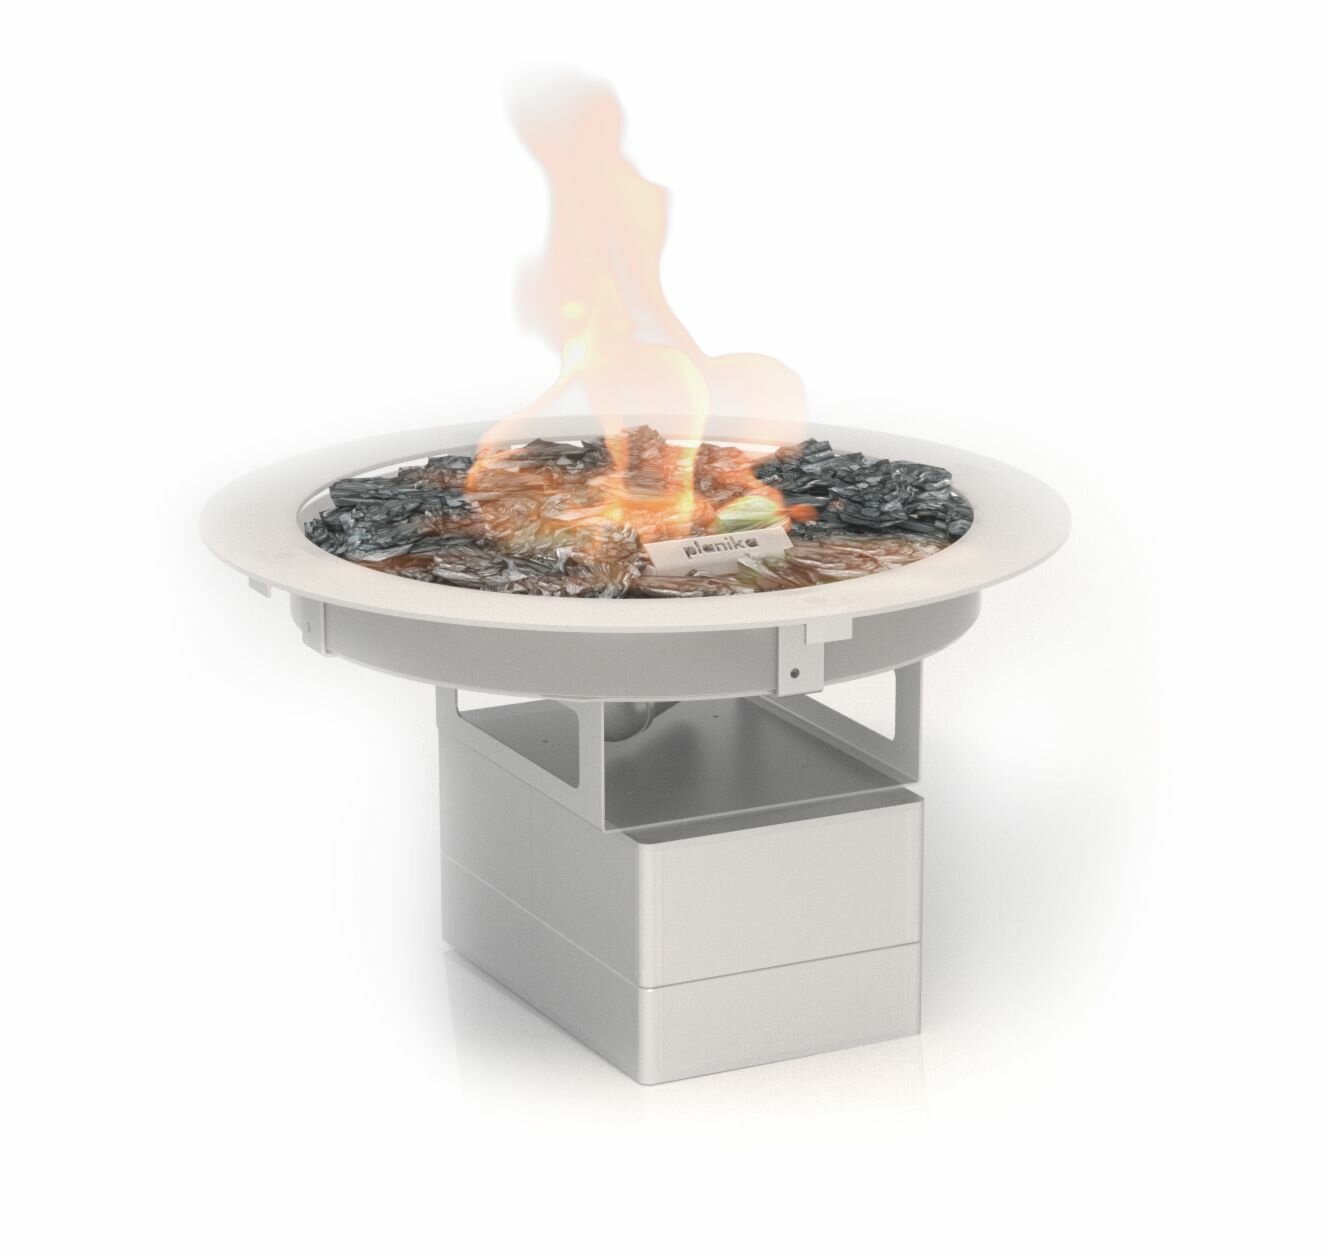 Planika Round Galio Outdoor Gas Fire, Gas Fire Pit Ring Insert